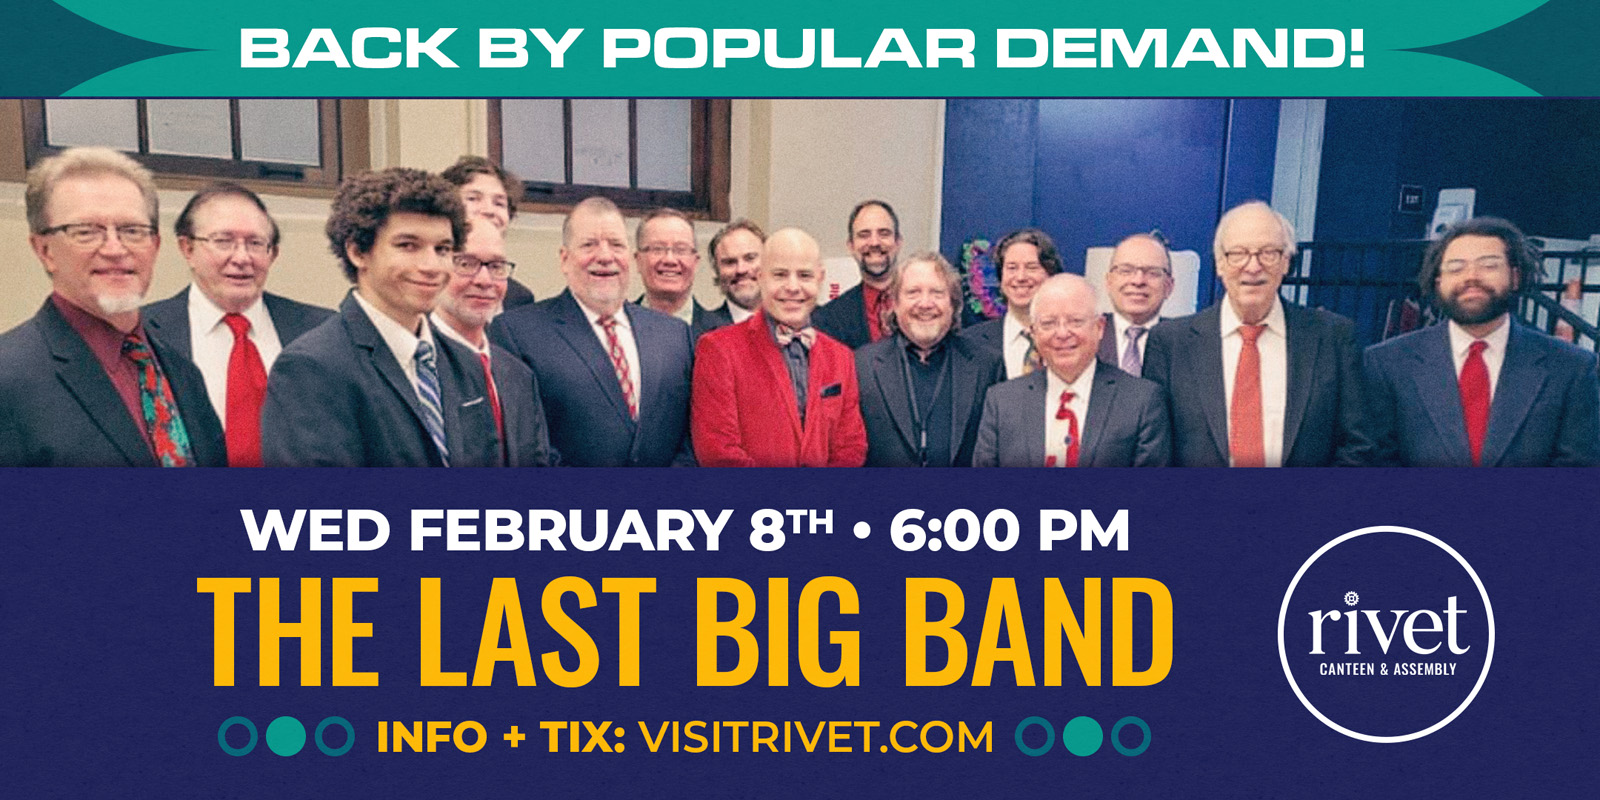 The Last Big Band will be performing live at Rivet: Canteen & Assembly once again on Wednesday, February 8th, 2022. Back by popular demand!